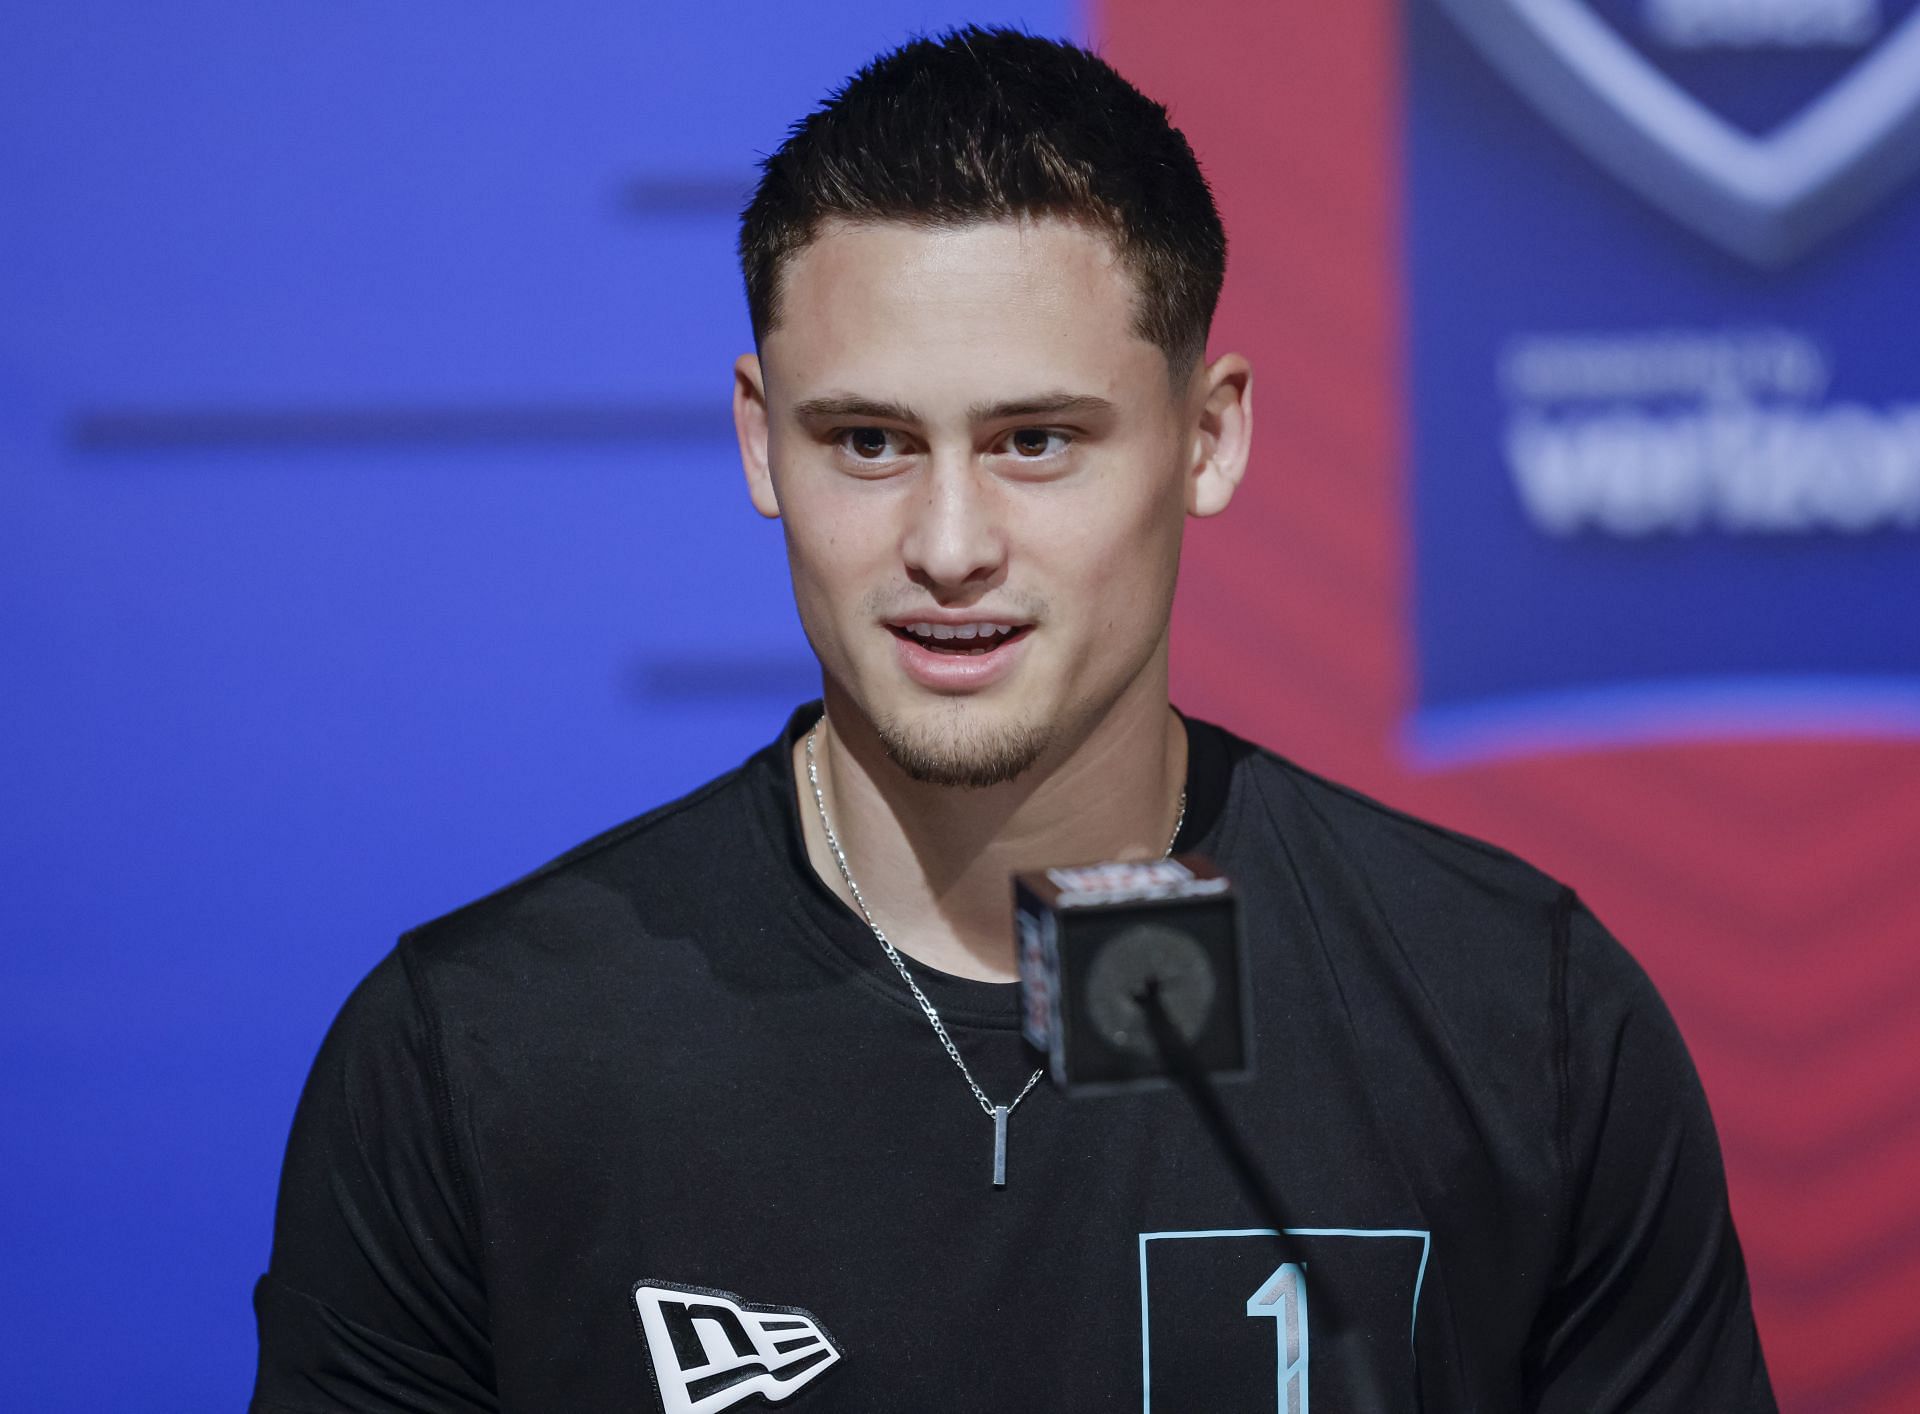 The San Diego State punter at the NFL Combine.